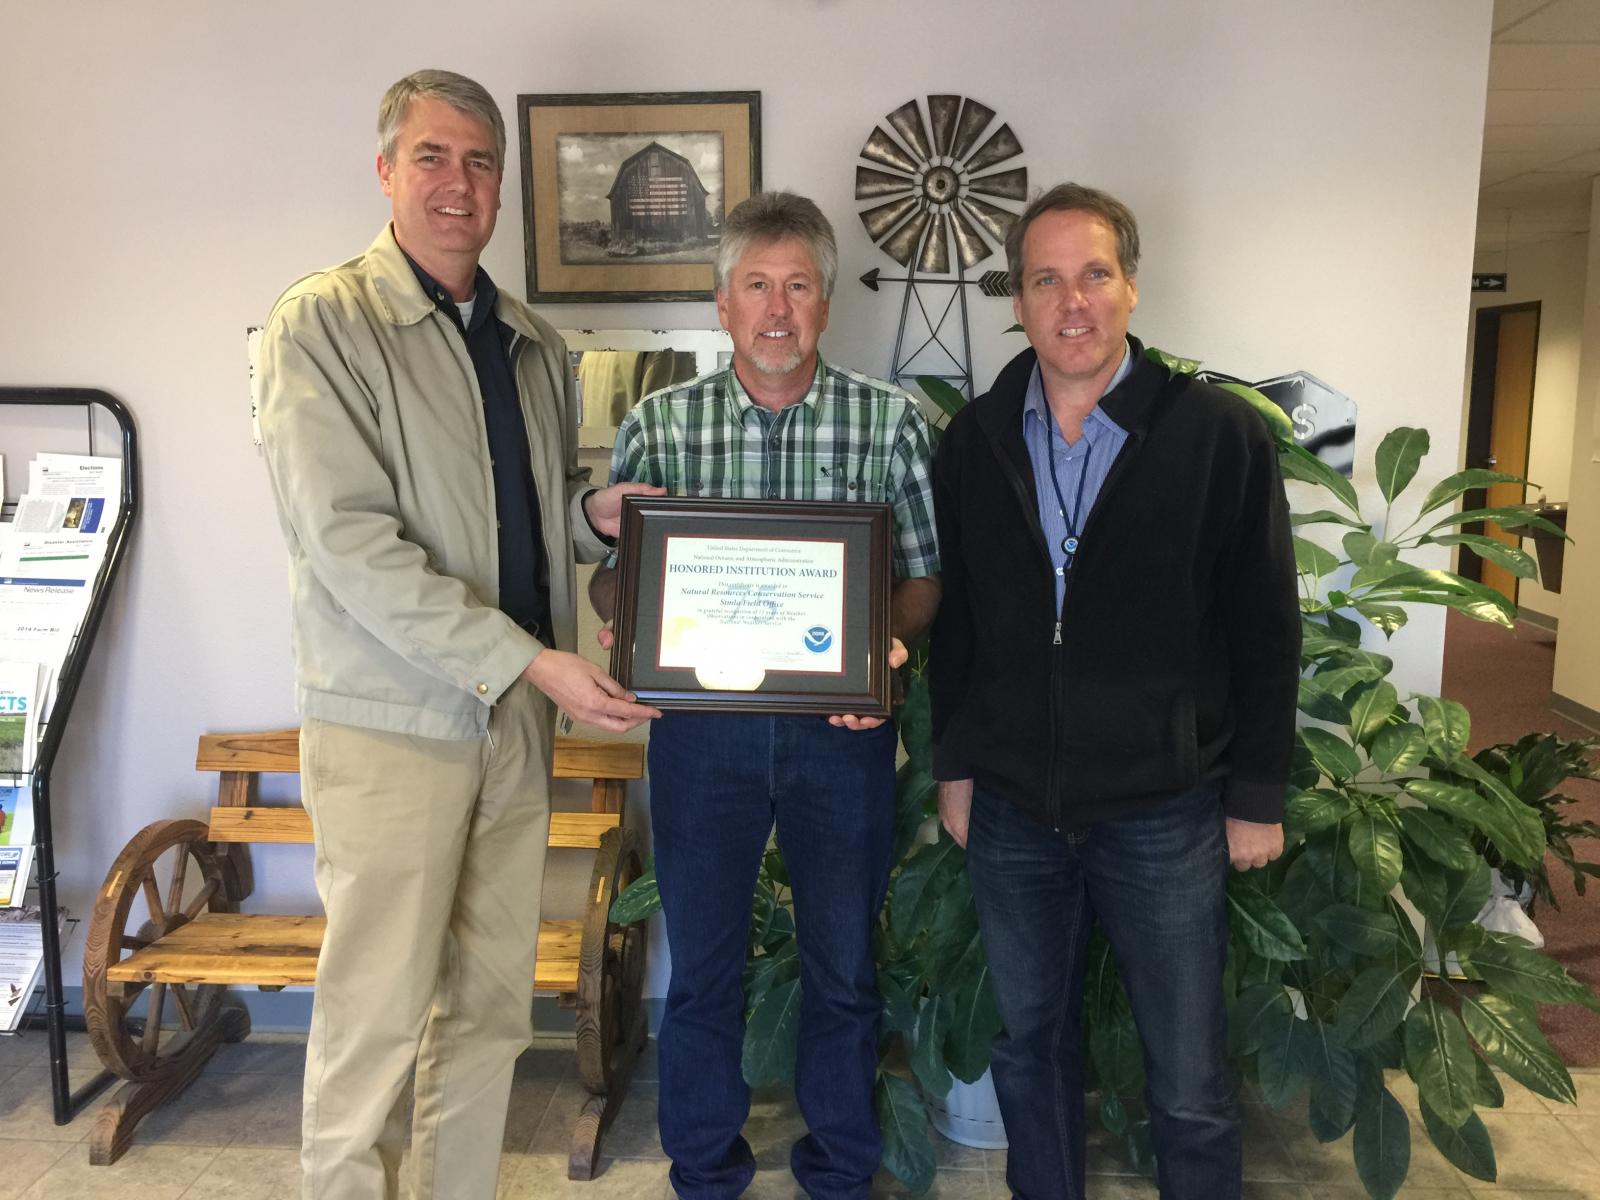 USDA NRCS Simla receives its Honored Institution Award for 50 Years of Service